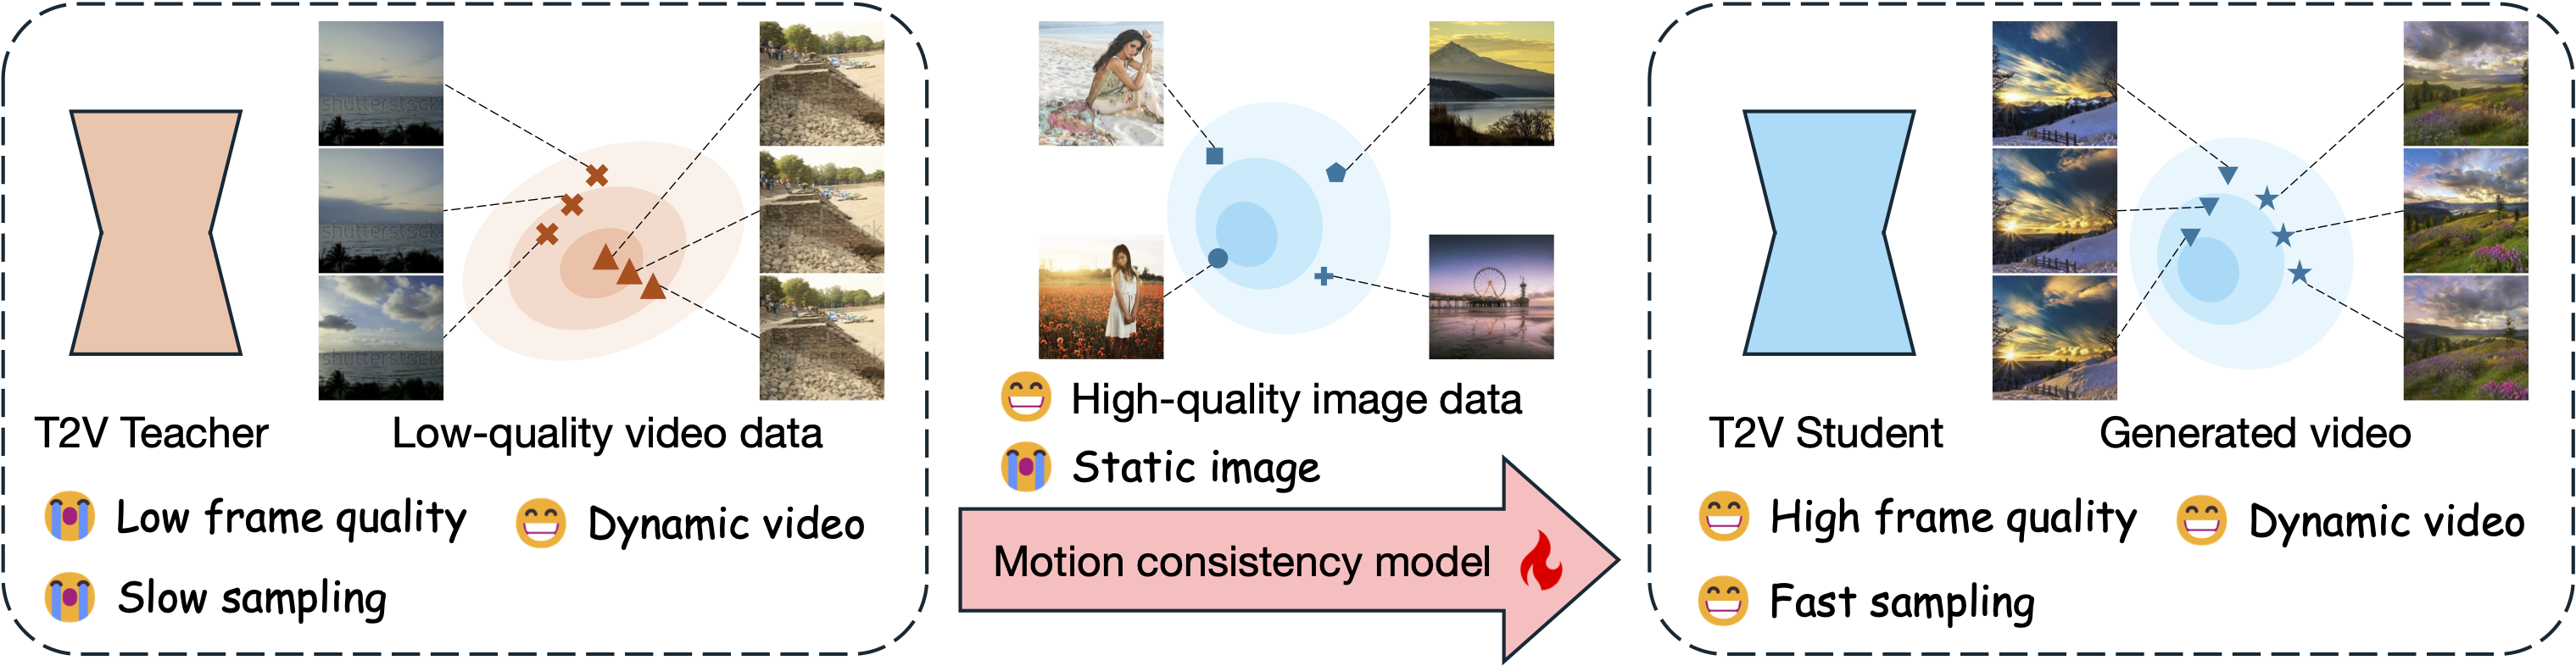 Our motion consistency model not only distill the motion prior from the teacher to accelerate sampling, but also can benefit from an additional high-quality image dataset to improve the frame quality of generated videos.